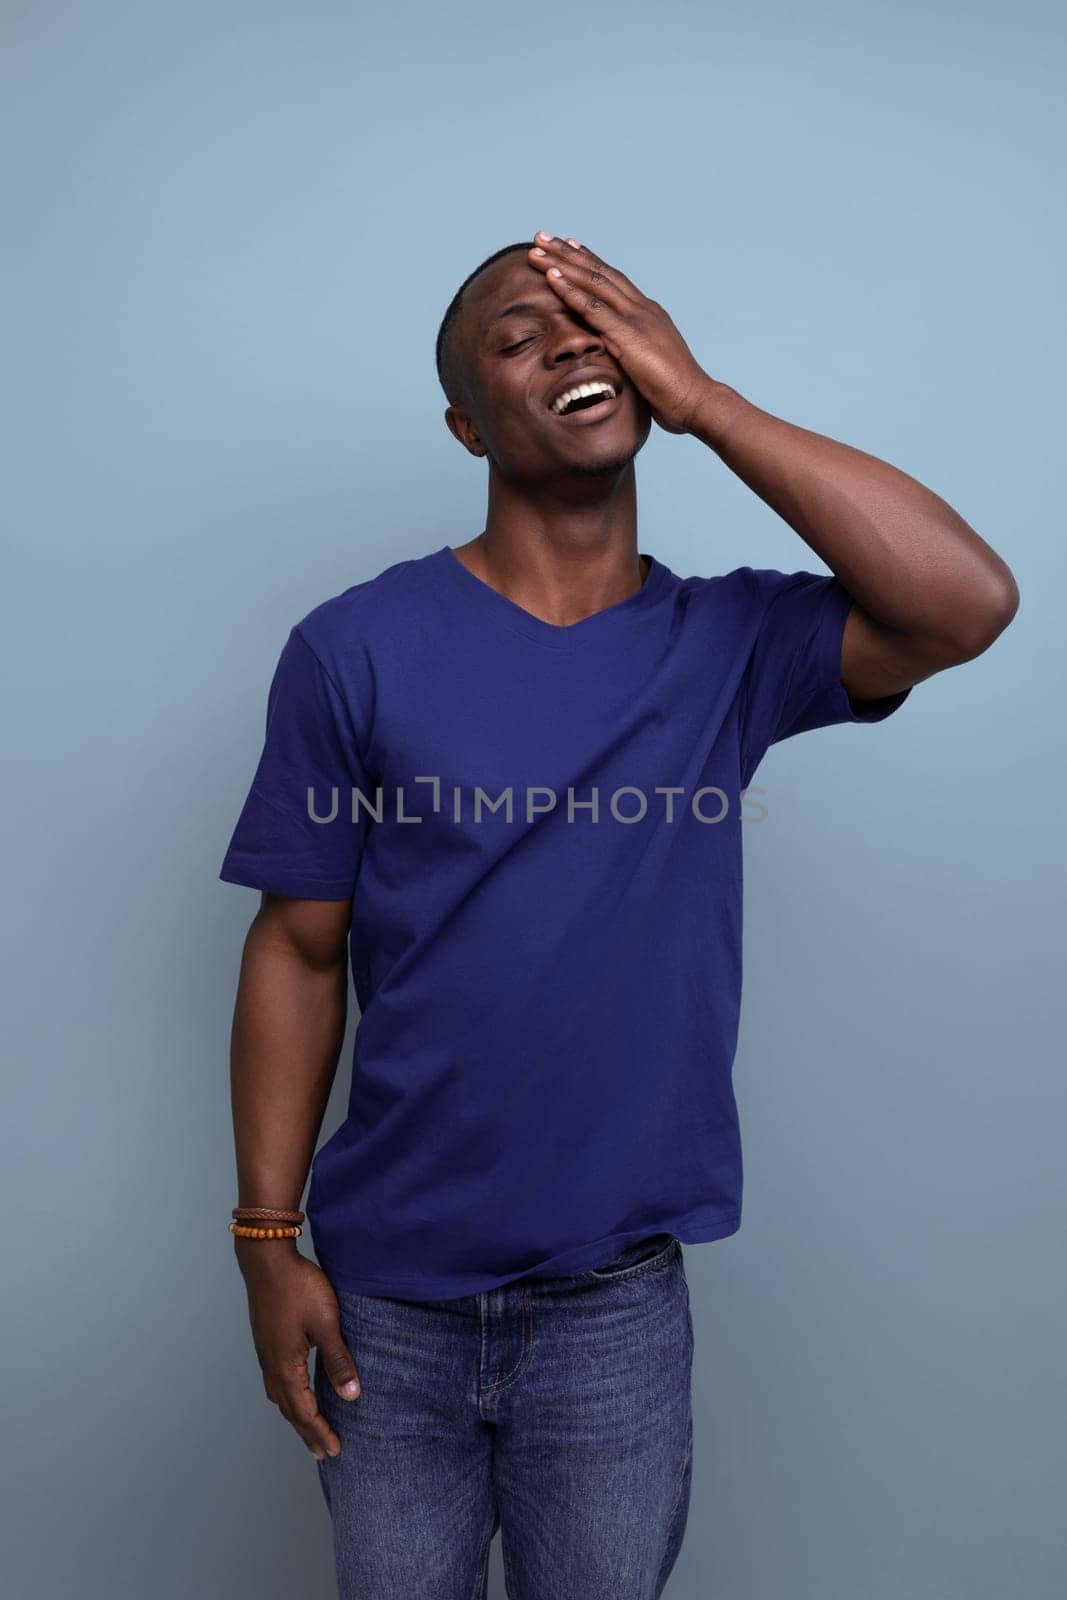 cute modest young african man in blue t-shirt on blue background.